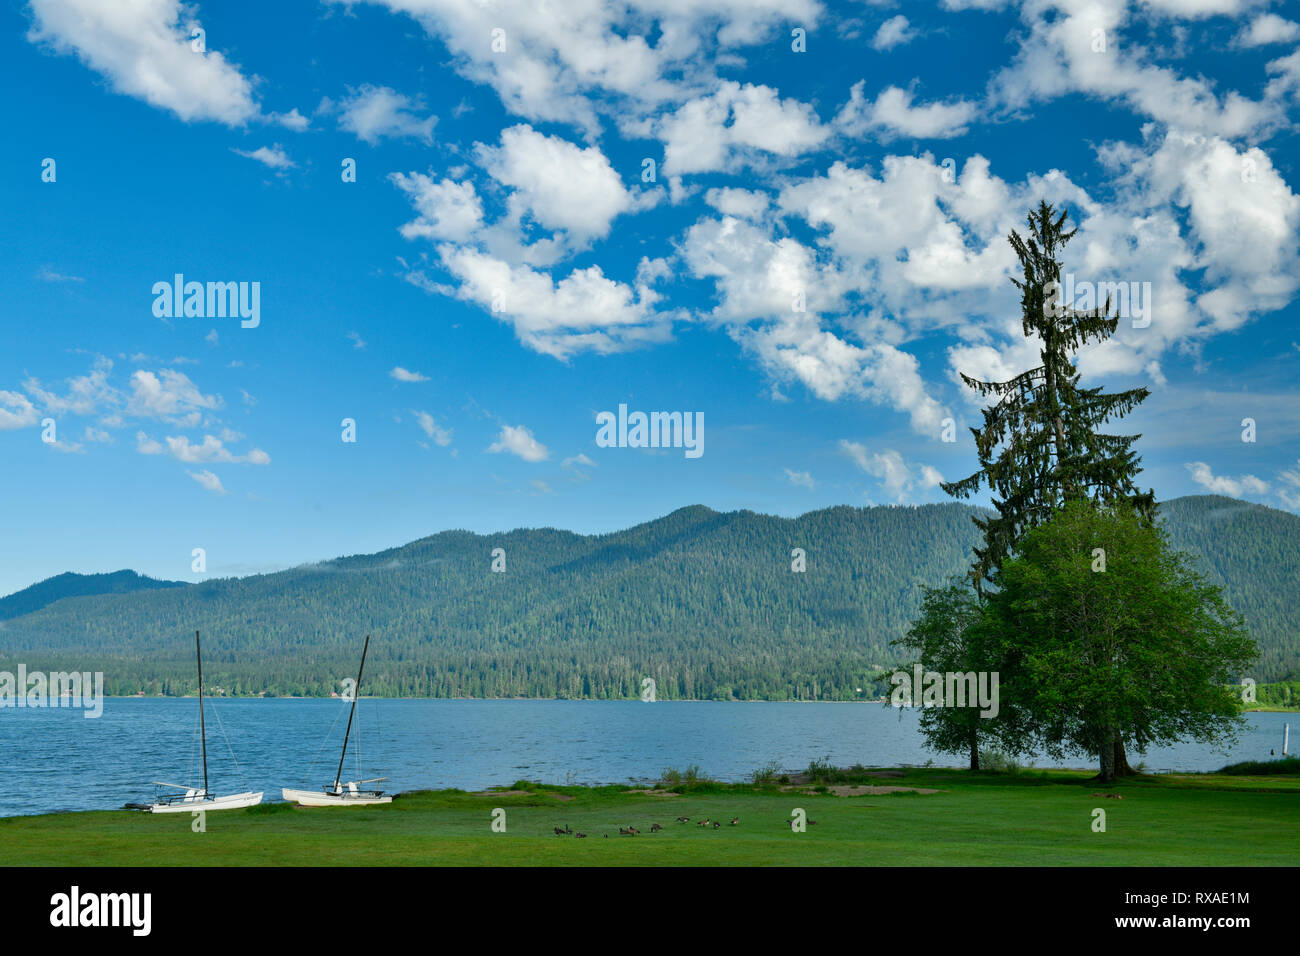 Lake Quinault, Olympic National Forest, Washington State, USA Banque D'Images